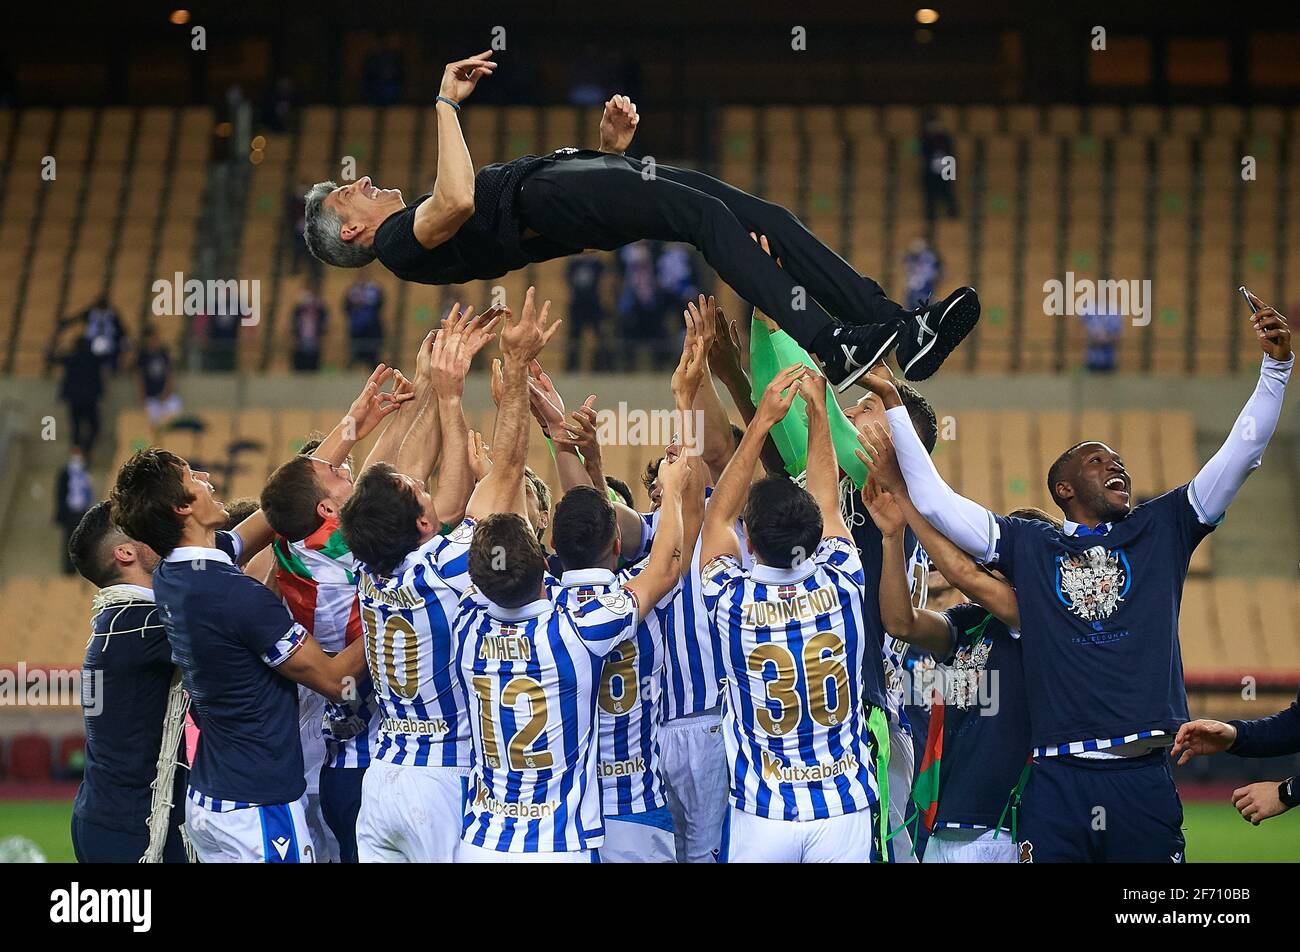 Seville, Spain. 3rd Apr, 2021. Players of Real Sociedad celebrate the victory by throwing head coach Imanol Alguacil after the Spanish King's Cup final match between Athletic Club Bilbao and Real Sociedad in Seville, Spain, on April 3, 2021. The game is the rescheduled final of the 2019-2020 competition which was originally postponed due to the coronavirus pandemic. Credit: Pablo Morano/Xinhua/Alamy Live News Stock Photo